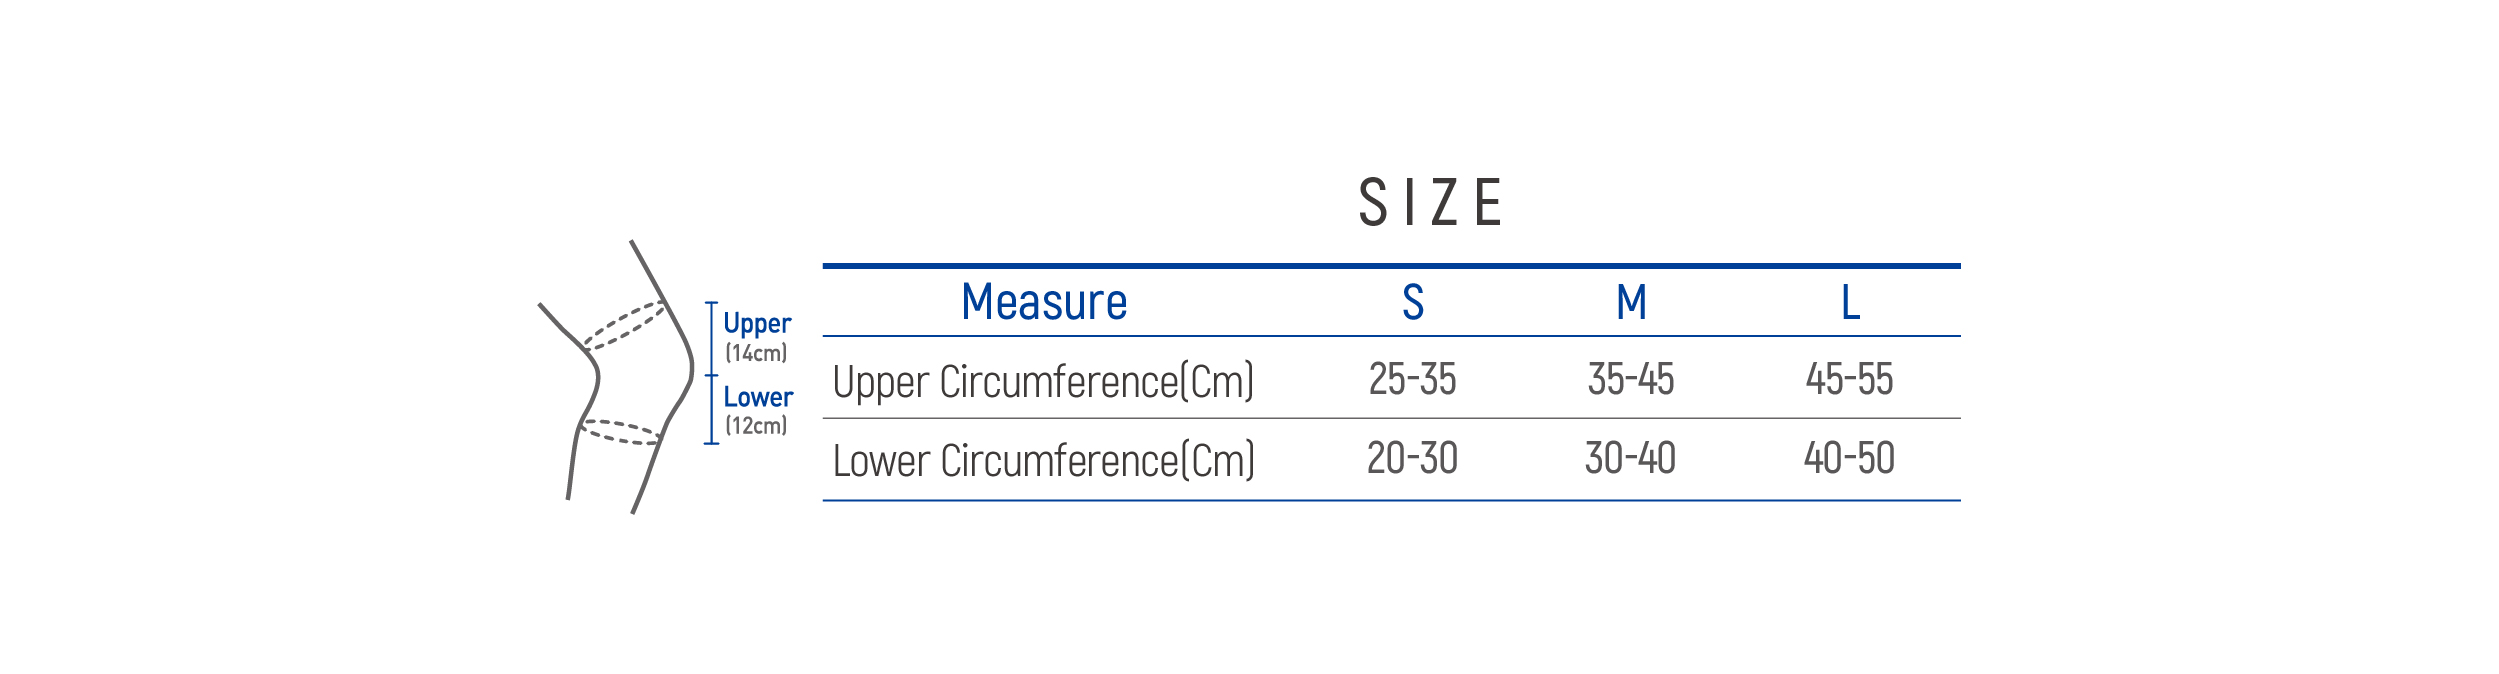 DR-K024 Size table image